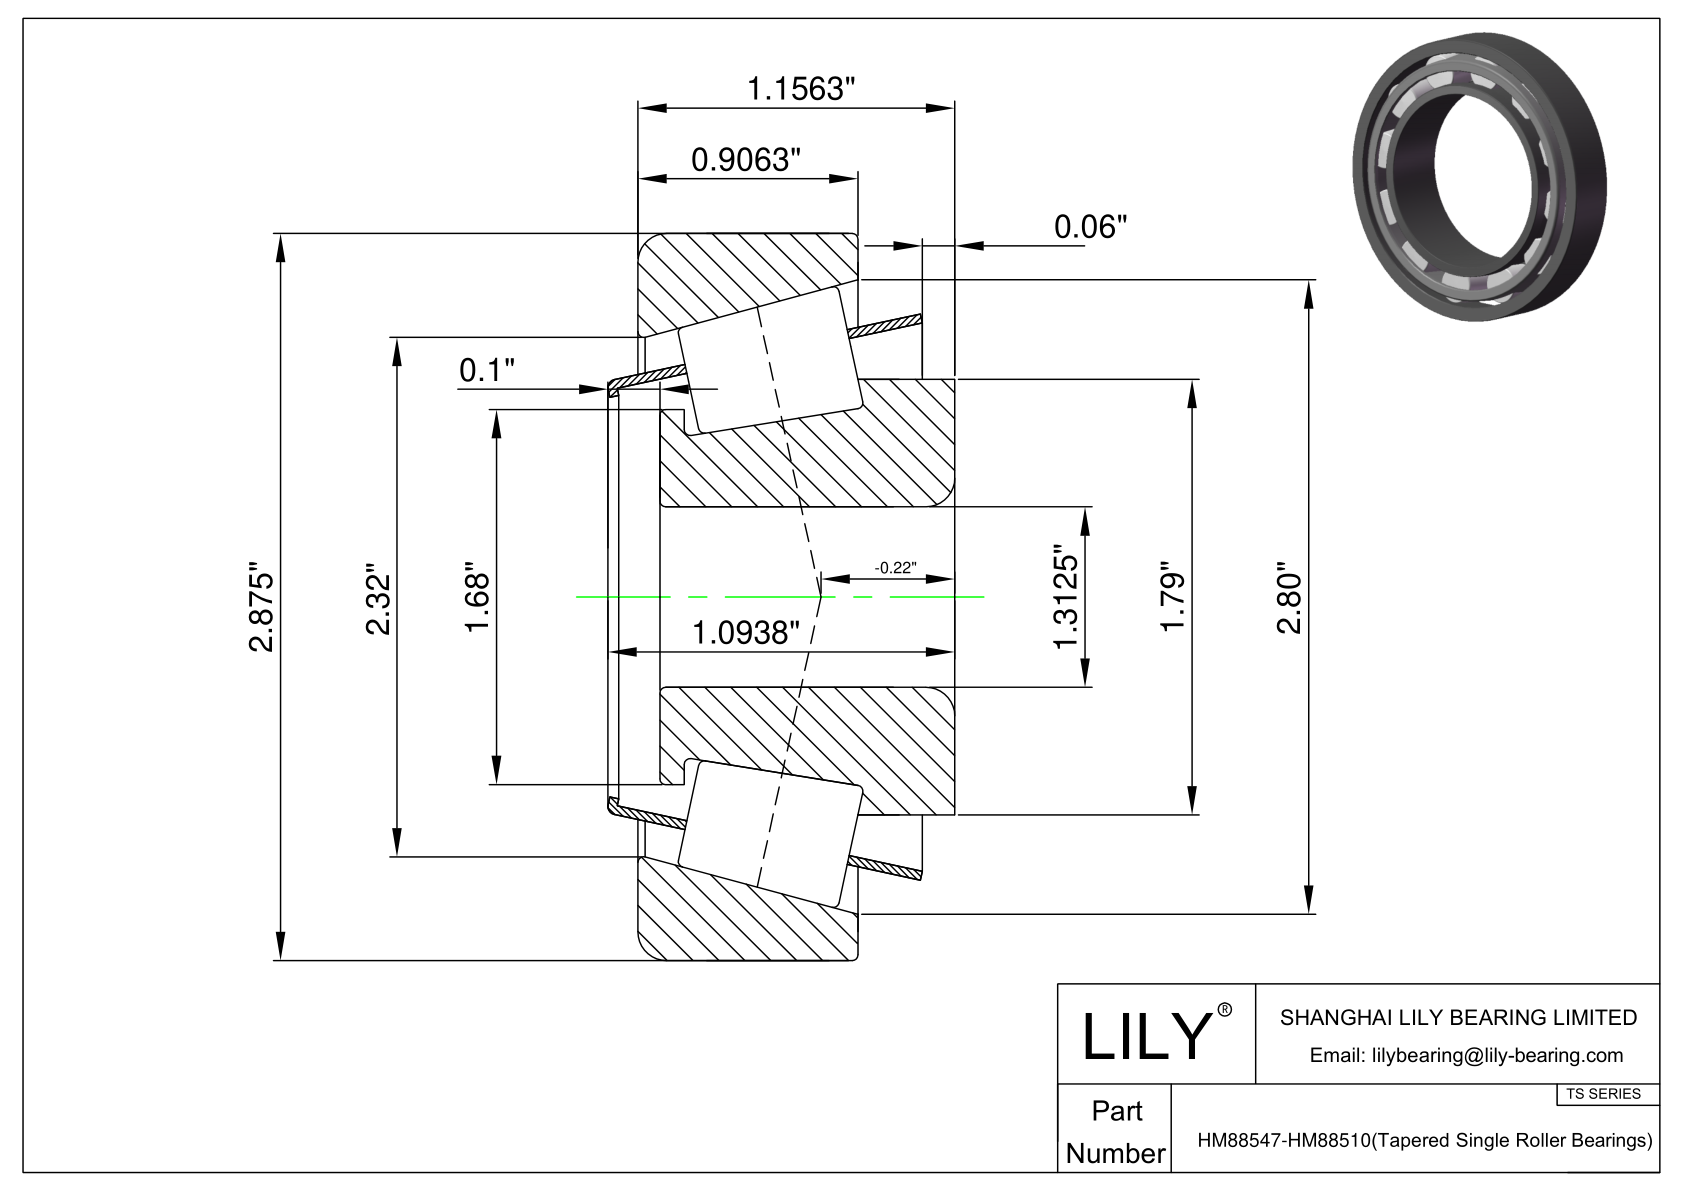 HM88547-HM88510 TS (Tapered Single Roller Bearings) (Imperial) cad drawing